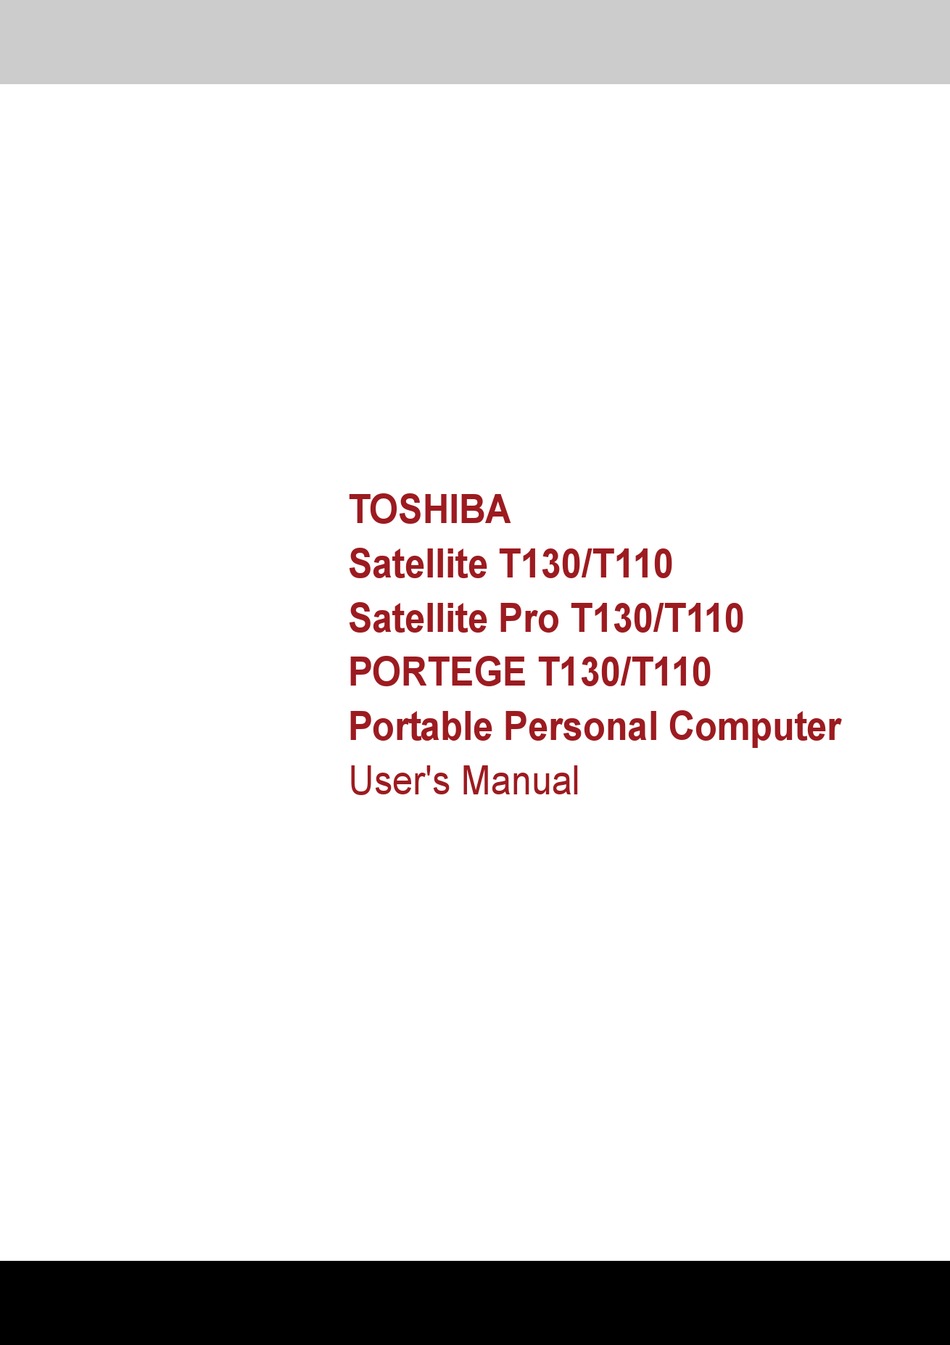 toshiba bluetooth stack for users without toshiba hardware